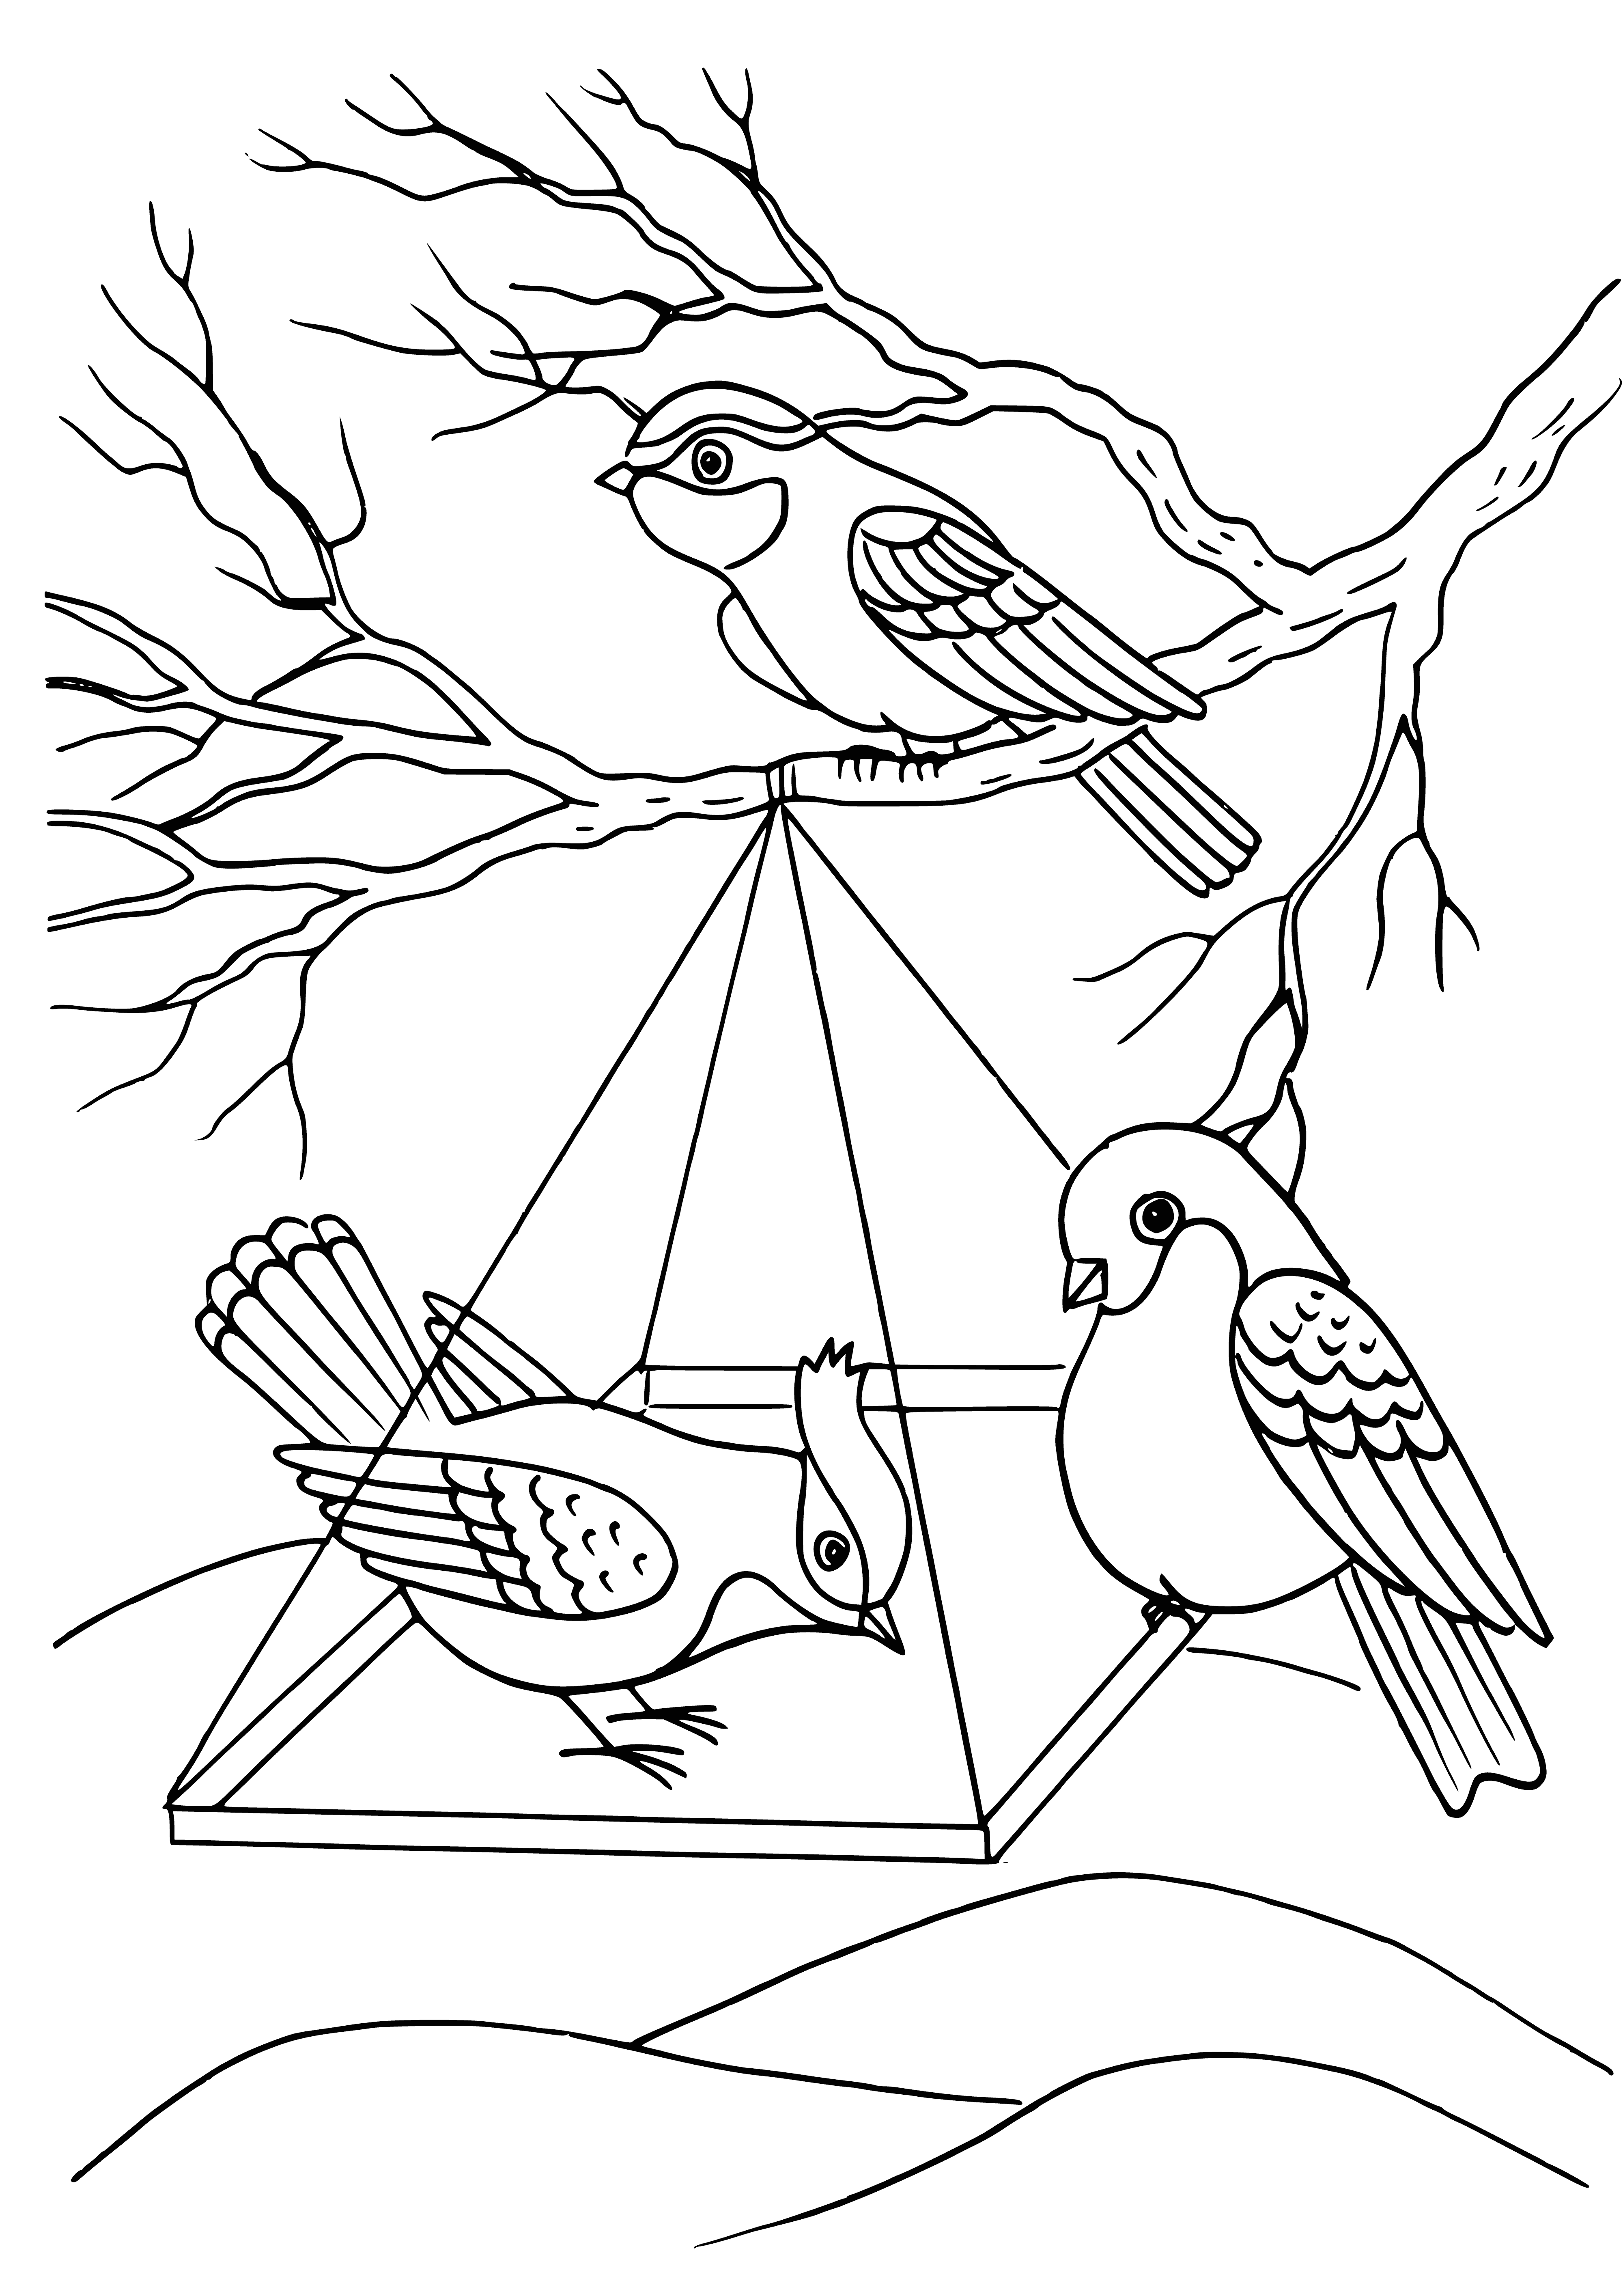 Birds in the feeder coloring page